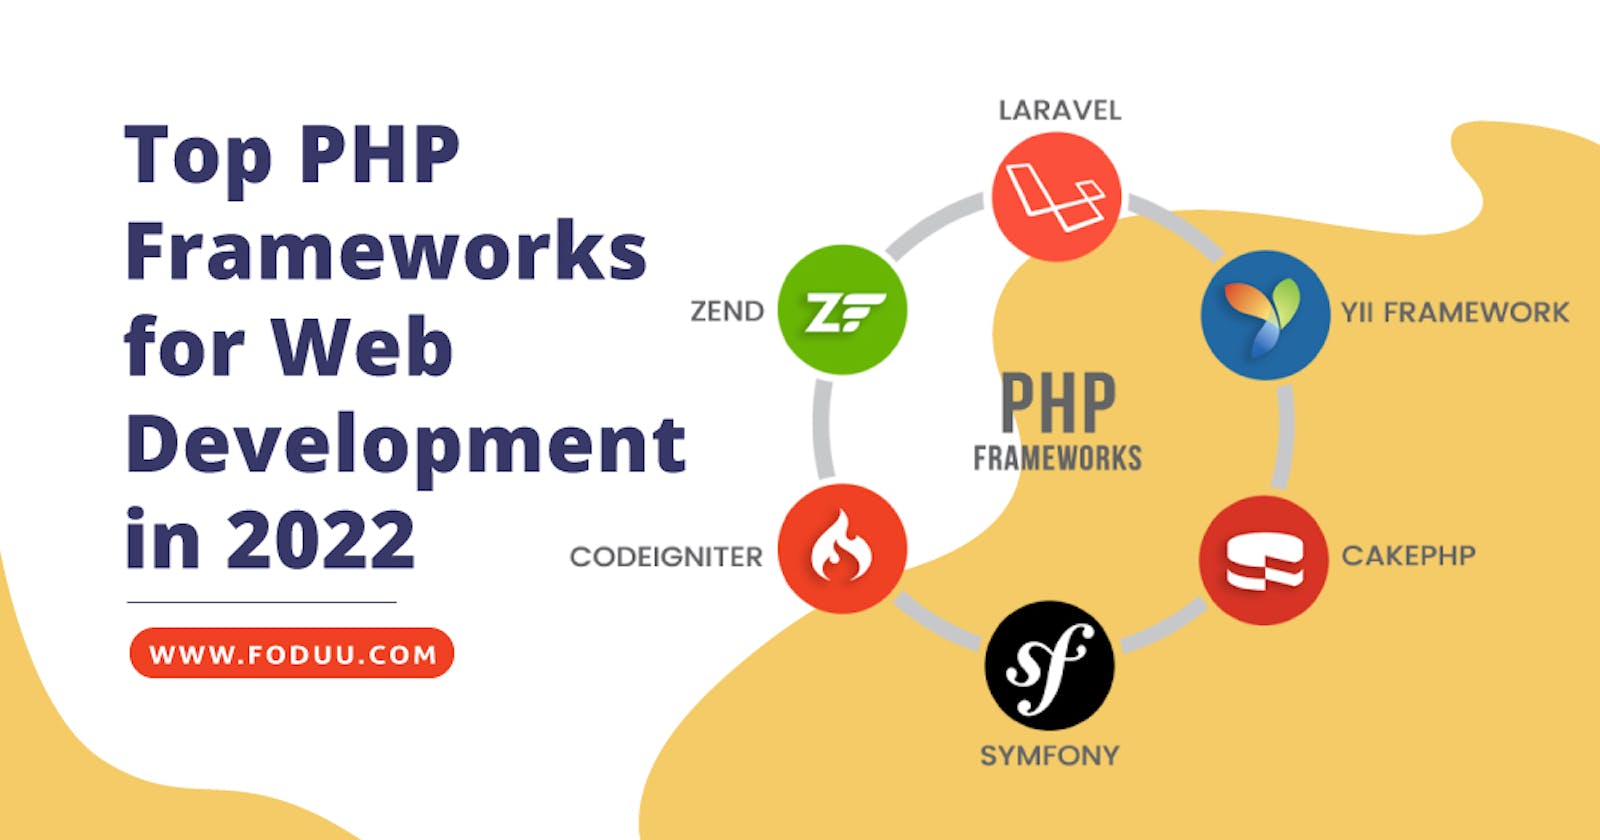 Top PHP Frameworks for Web Development in 2022